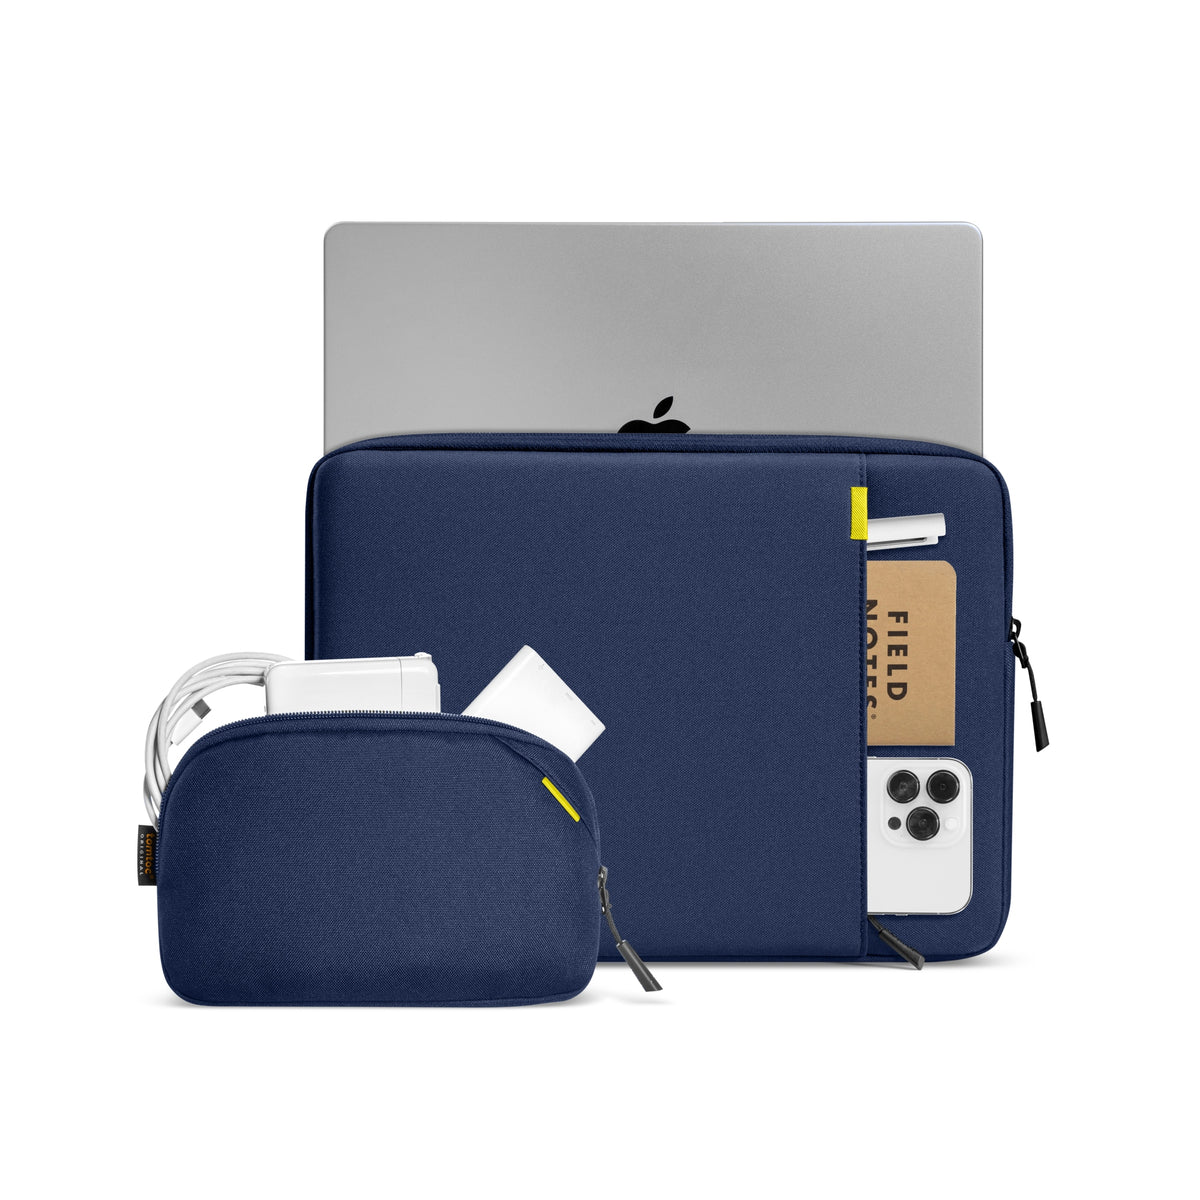 secondary_Defender-A13 Laptop Sleeve Kit For 13-inch New MacBook Pro | Navy Blue